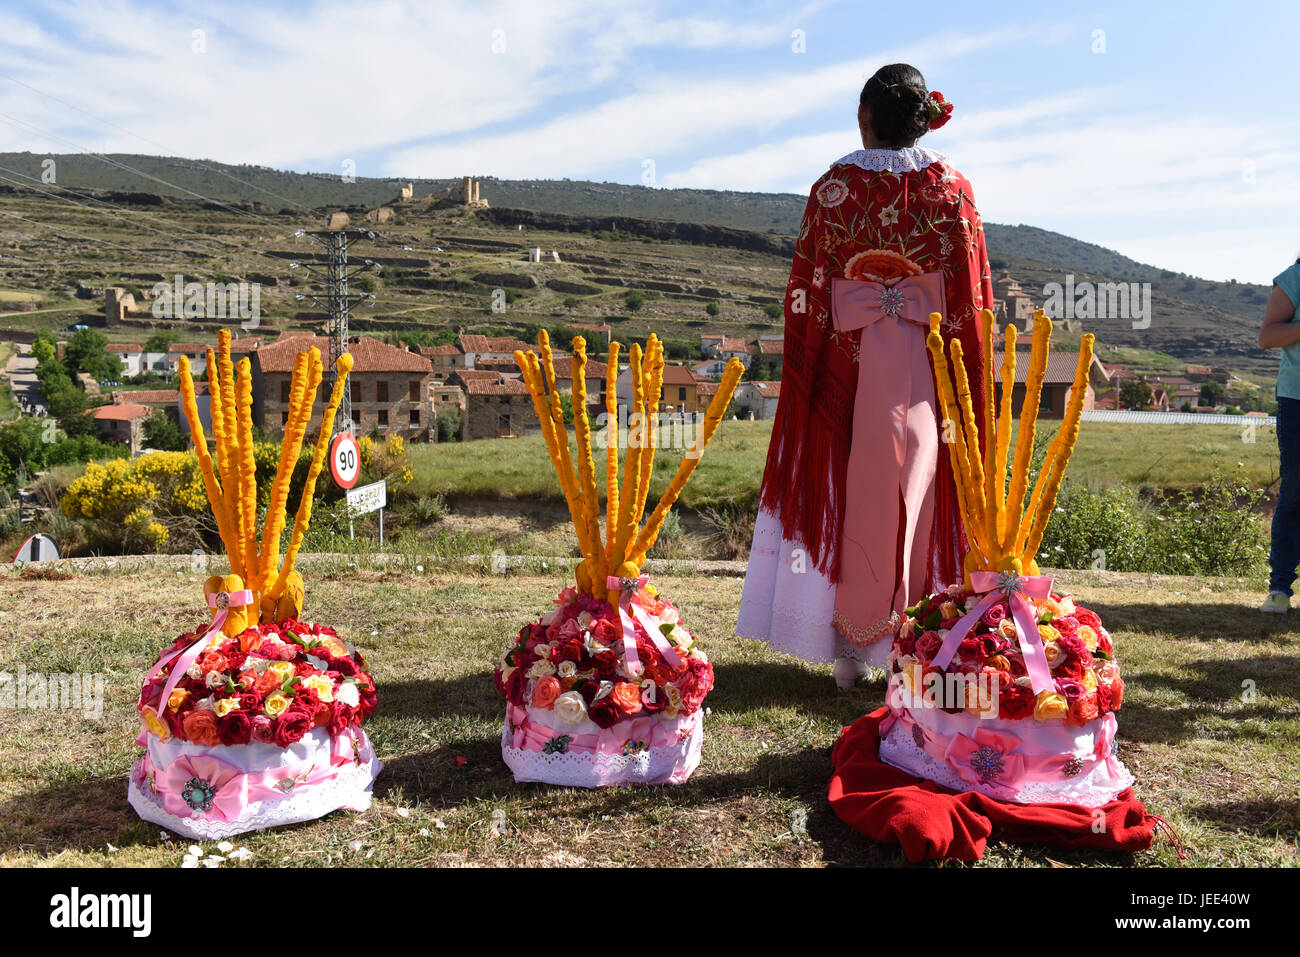 San Pedro Manrique, Spain. 24th June, 2017. Three 'Cestaños', hats decorated with flowers and branches, covered with unleavened bread and colored with saffron, pictured during the celebration of the ancient tradition of 'La Descubierta' in San Pedro Manrique, northern Spain. Credit: Jorge Sanz/Pacific Press/Alamy Live News Stock Photo